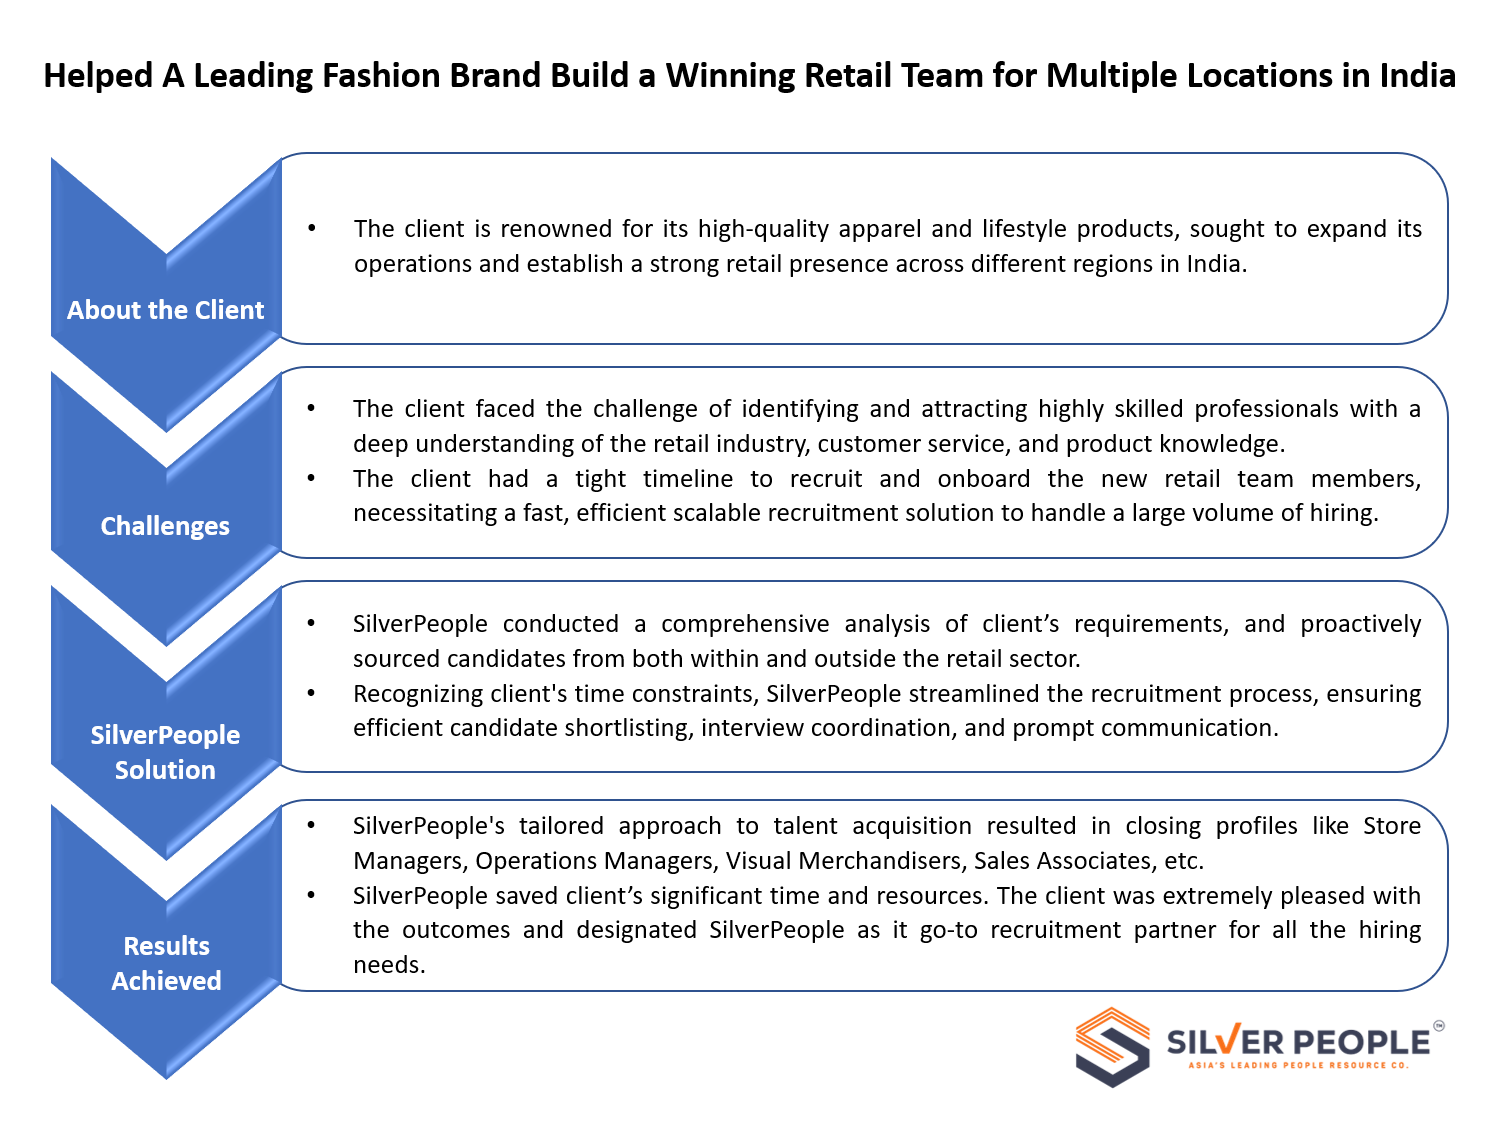 Helped A Leading Fashion Brand Build a Winning Retail Team for Multiple Locations in India